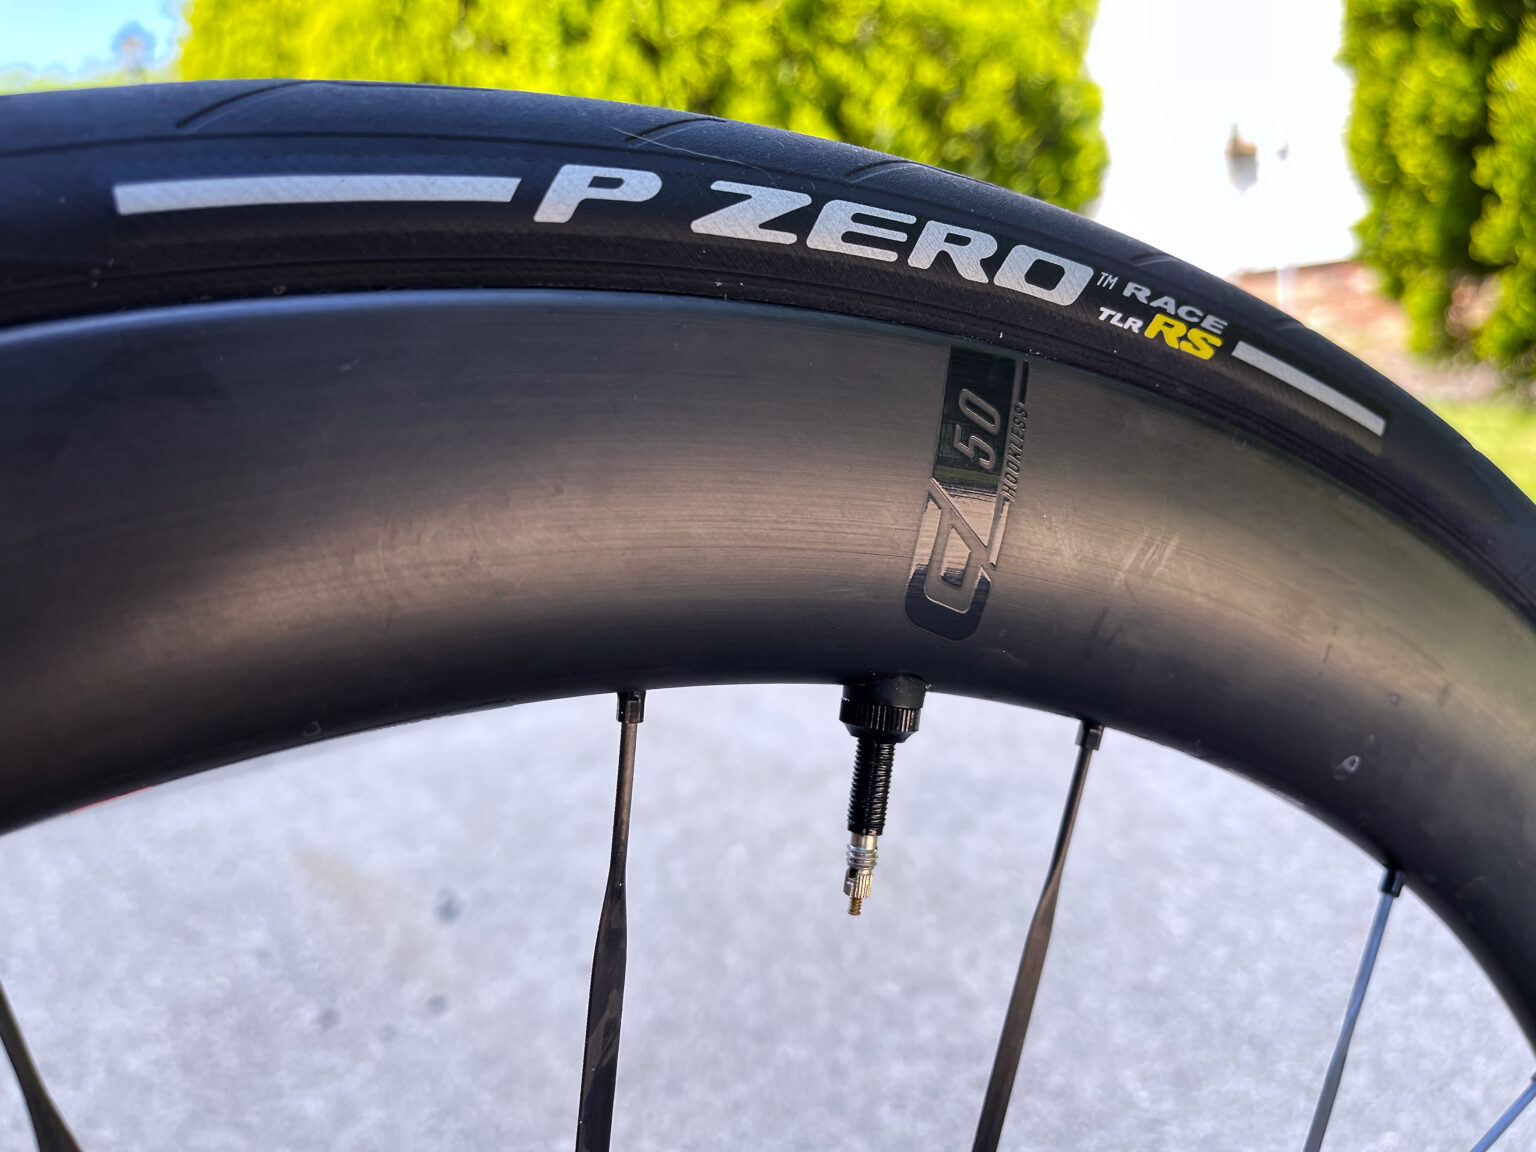 Pirelli P Zero TLR RS side with RS logo